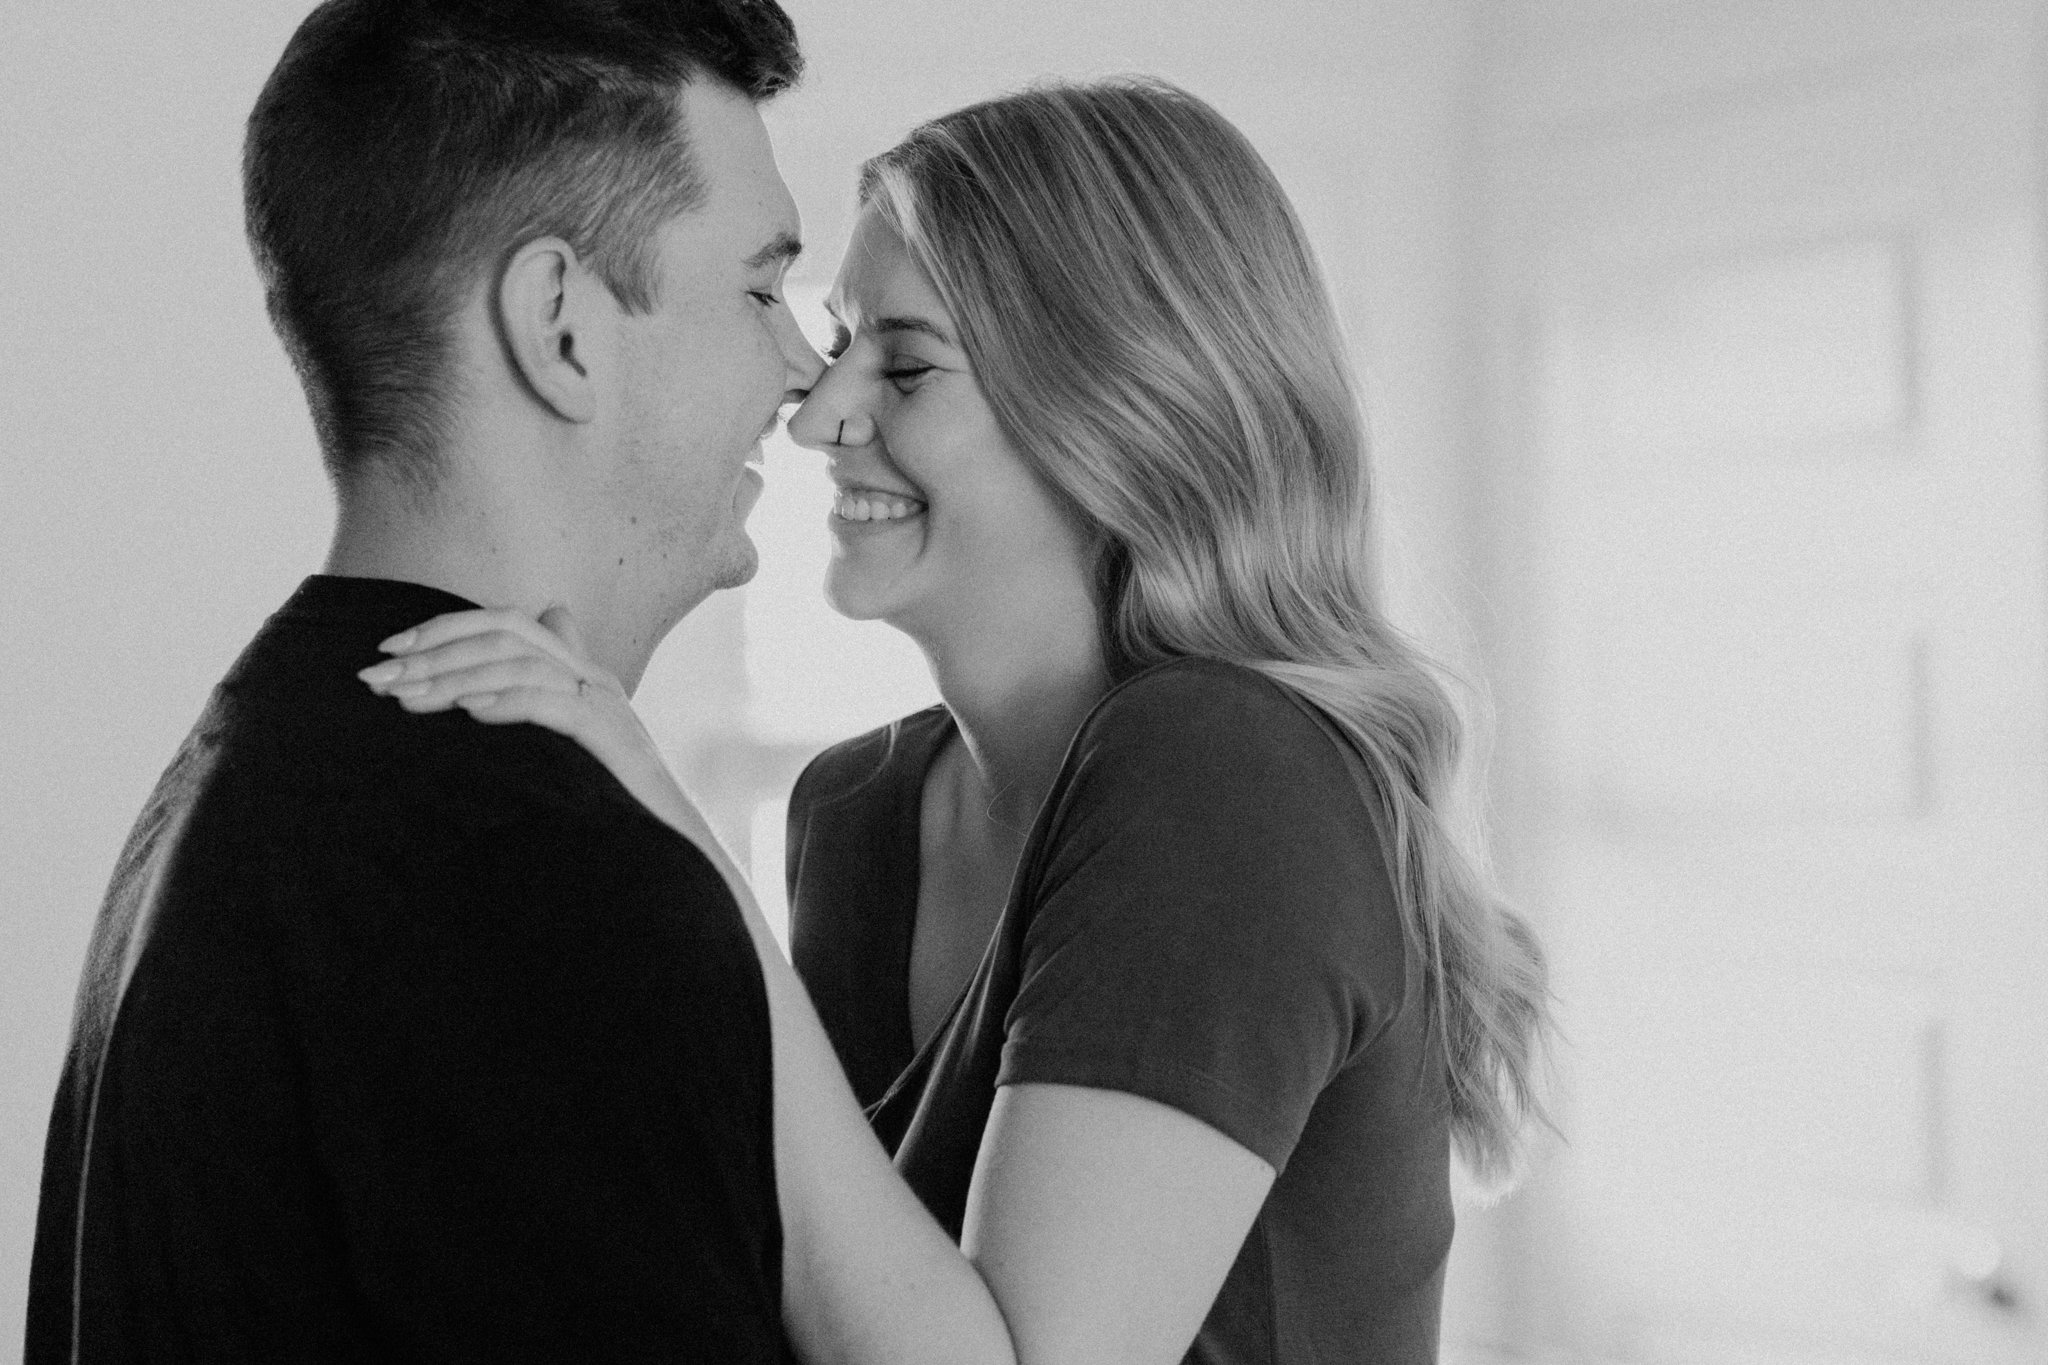 Calgary-wedding-photographer-love-and-be-loved-photography-Matthew-Kyra-In-Home-Engagement-Session-46.jpg